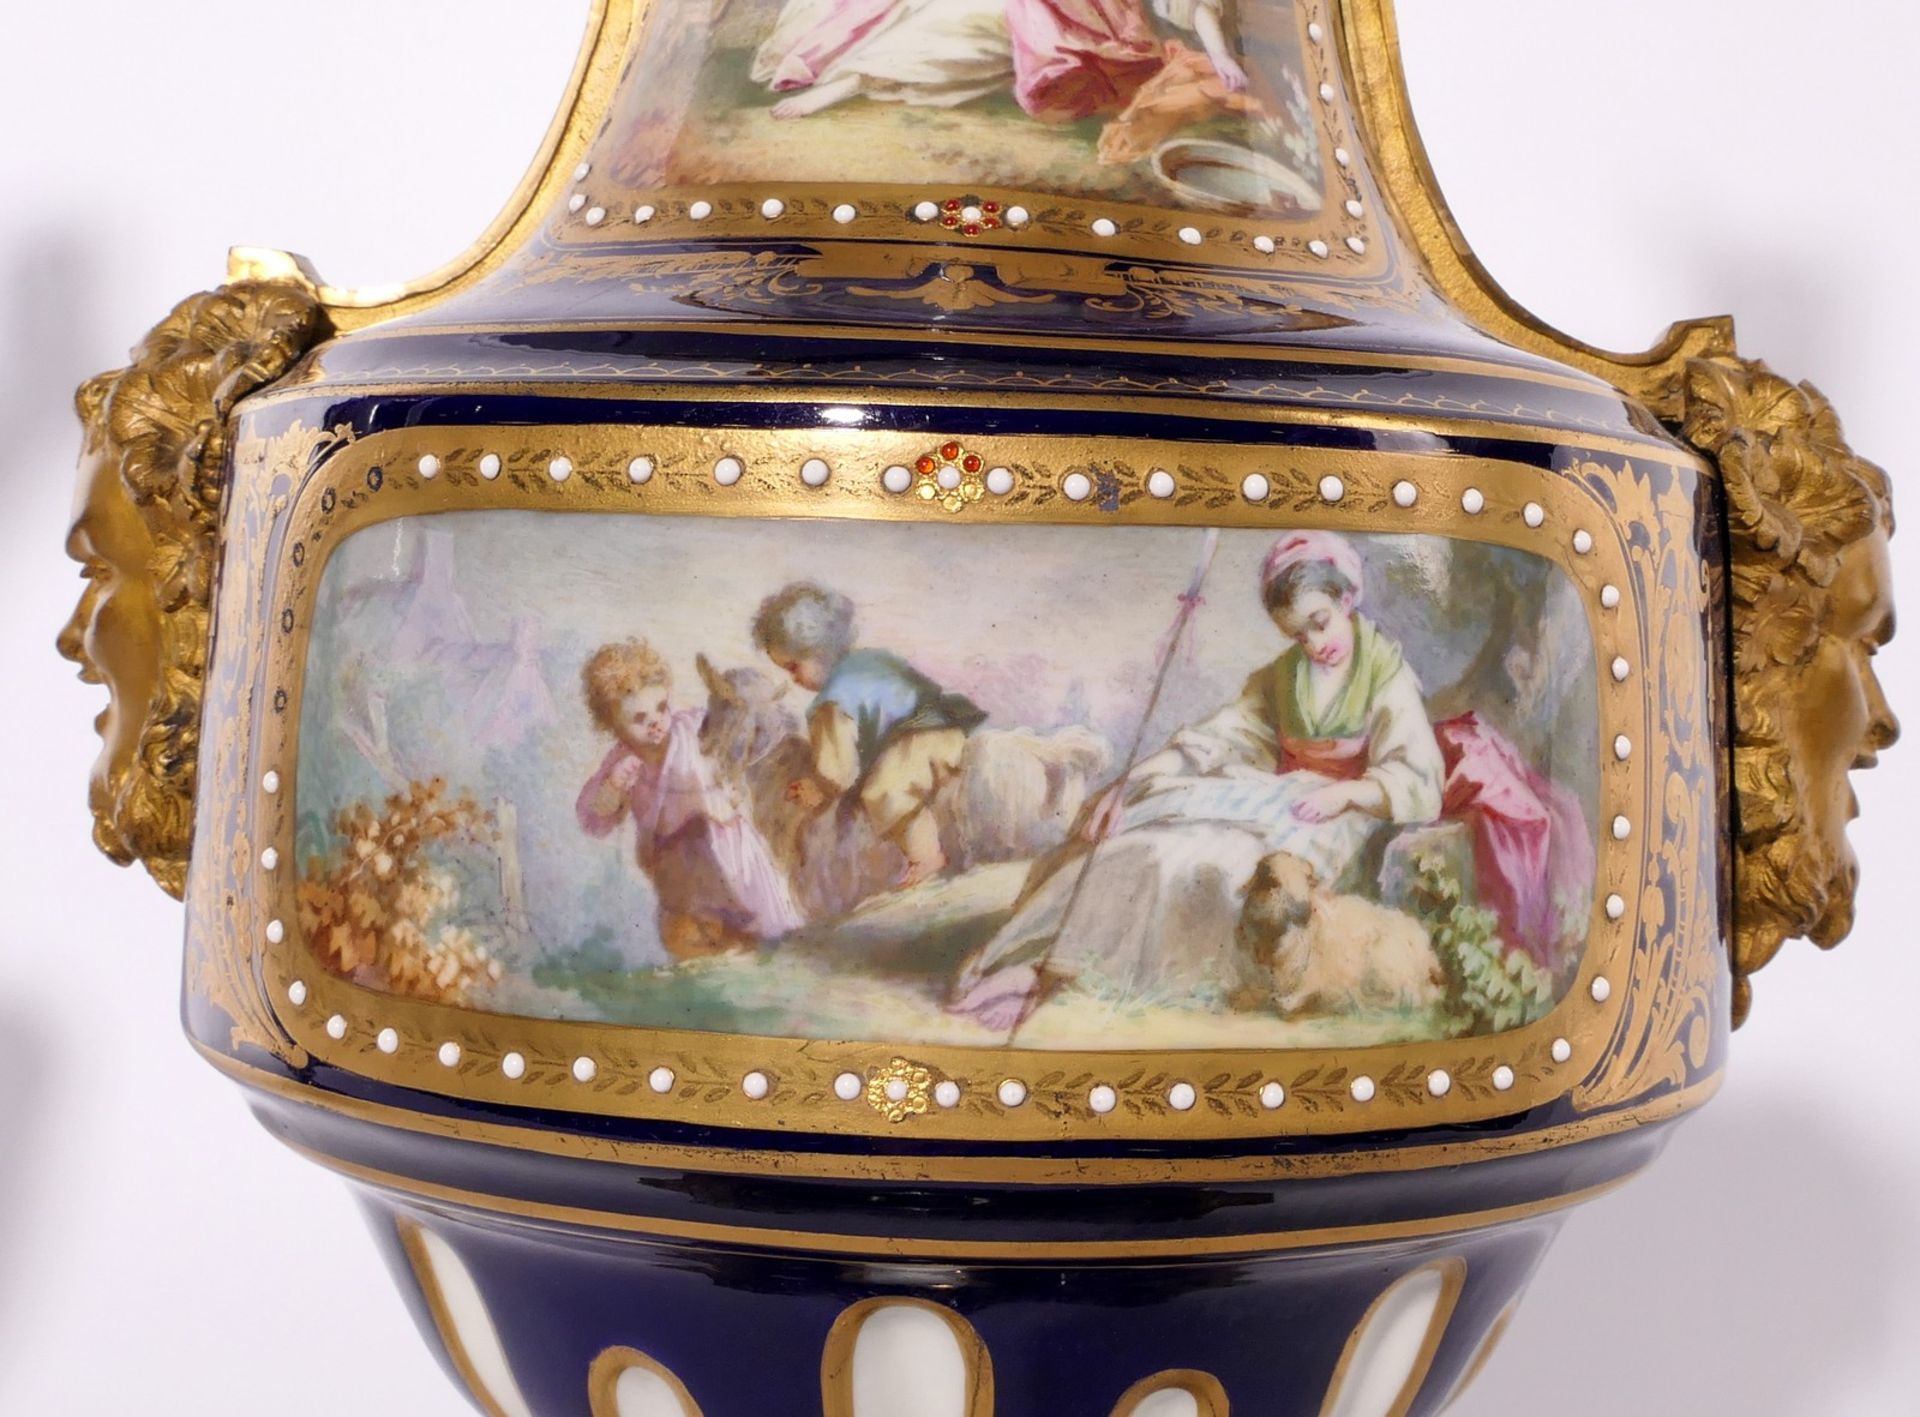 A pair of Neoclassical vases in Sèvres-porcelain, blue royale ground, the front with gilt cartouches - Image 8 of 11